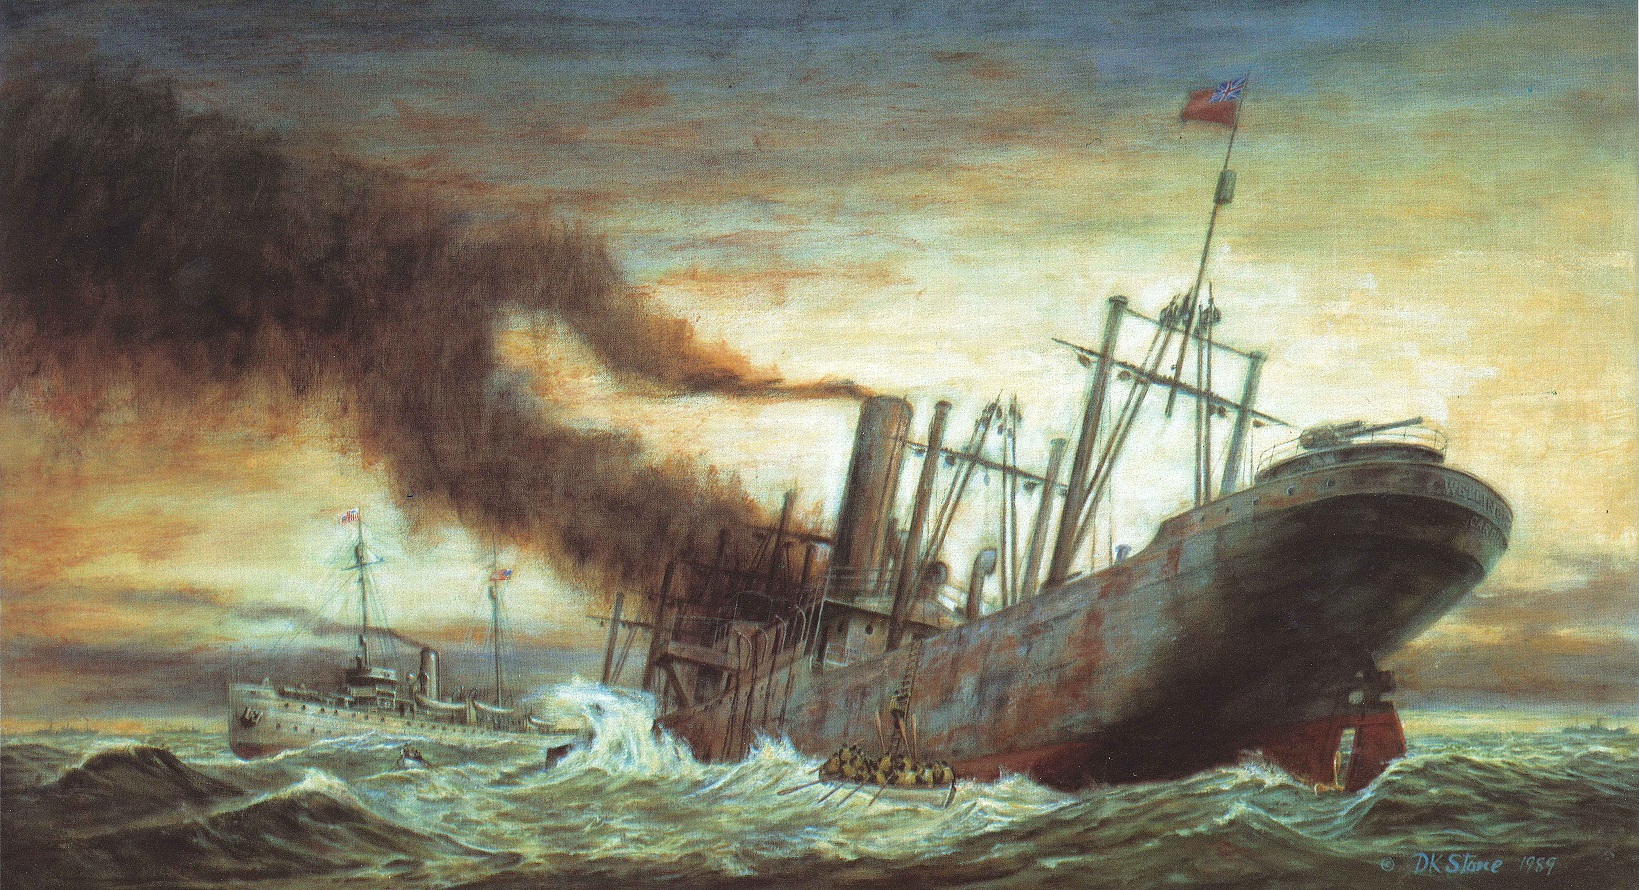 3.	Painting of the SS Wellington with Seneca in the background. This rescue effort is the most honored combat-related operation in Service history. (Coast Guard Collection)